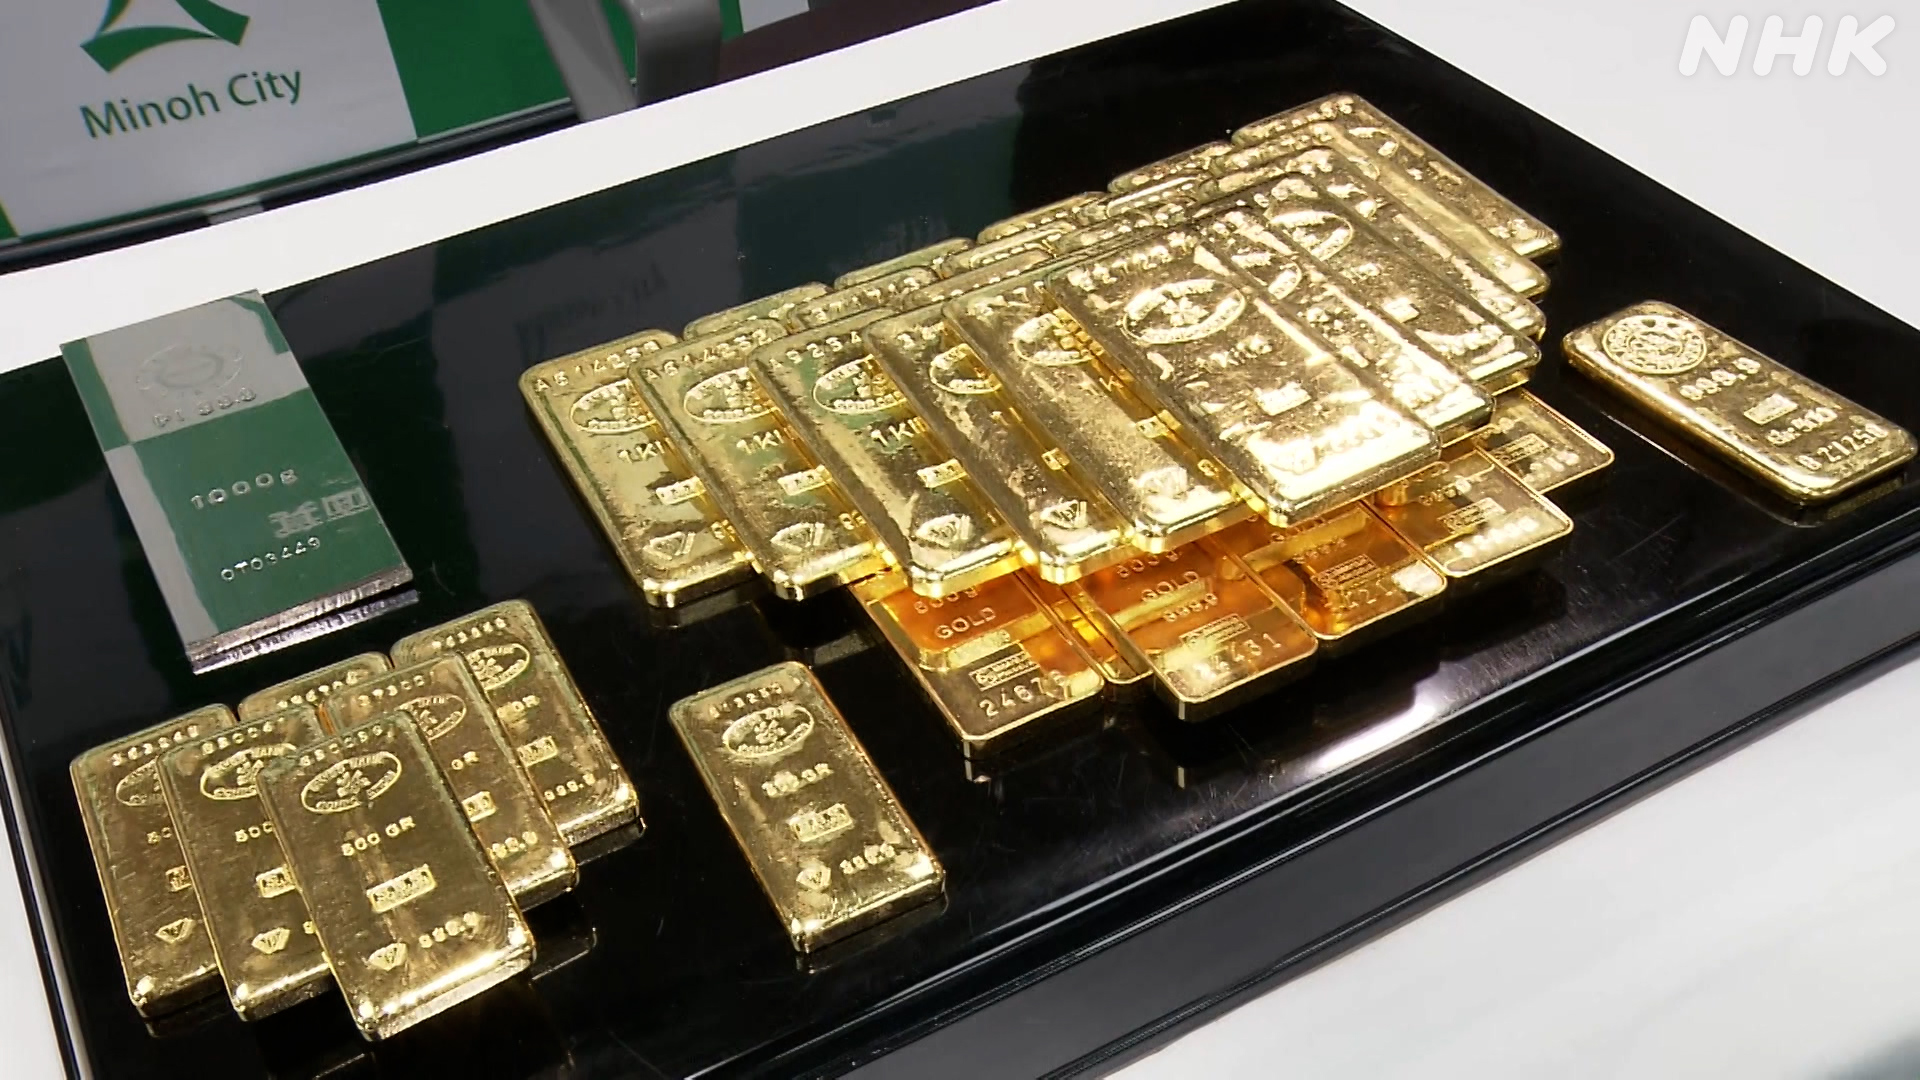 An 87-year-old man from Minoh, Osaka, donated 29 kg of gold bars to .. K10014104491_2306201346_0620135125_01_04